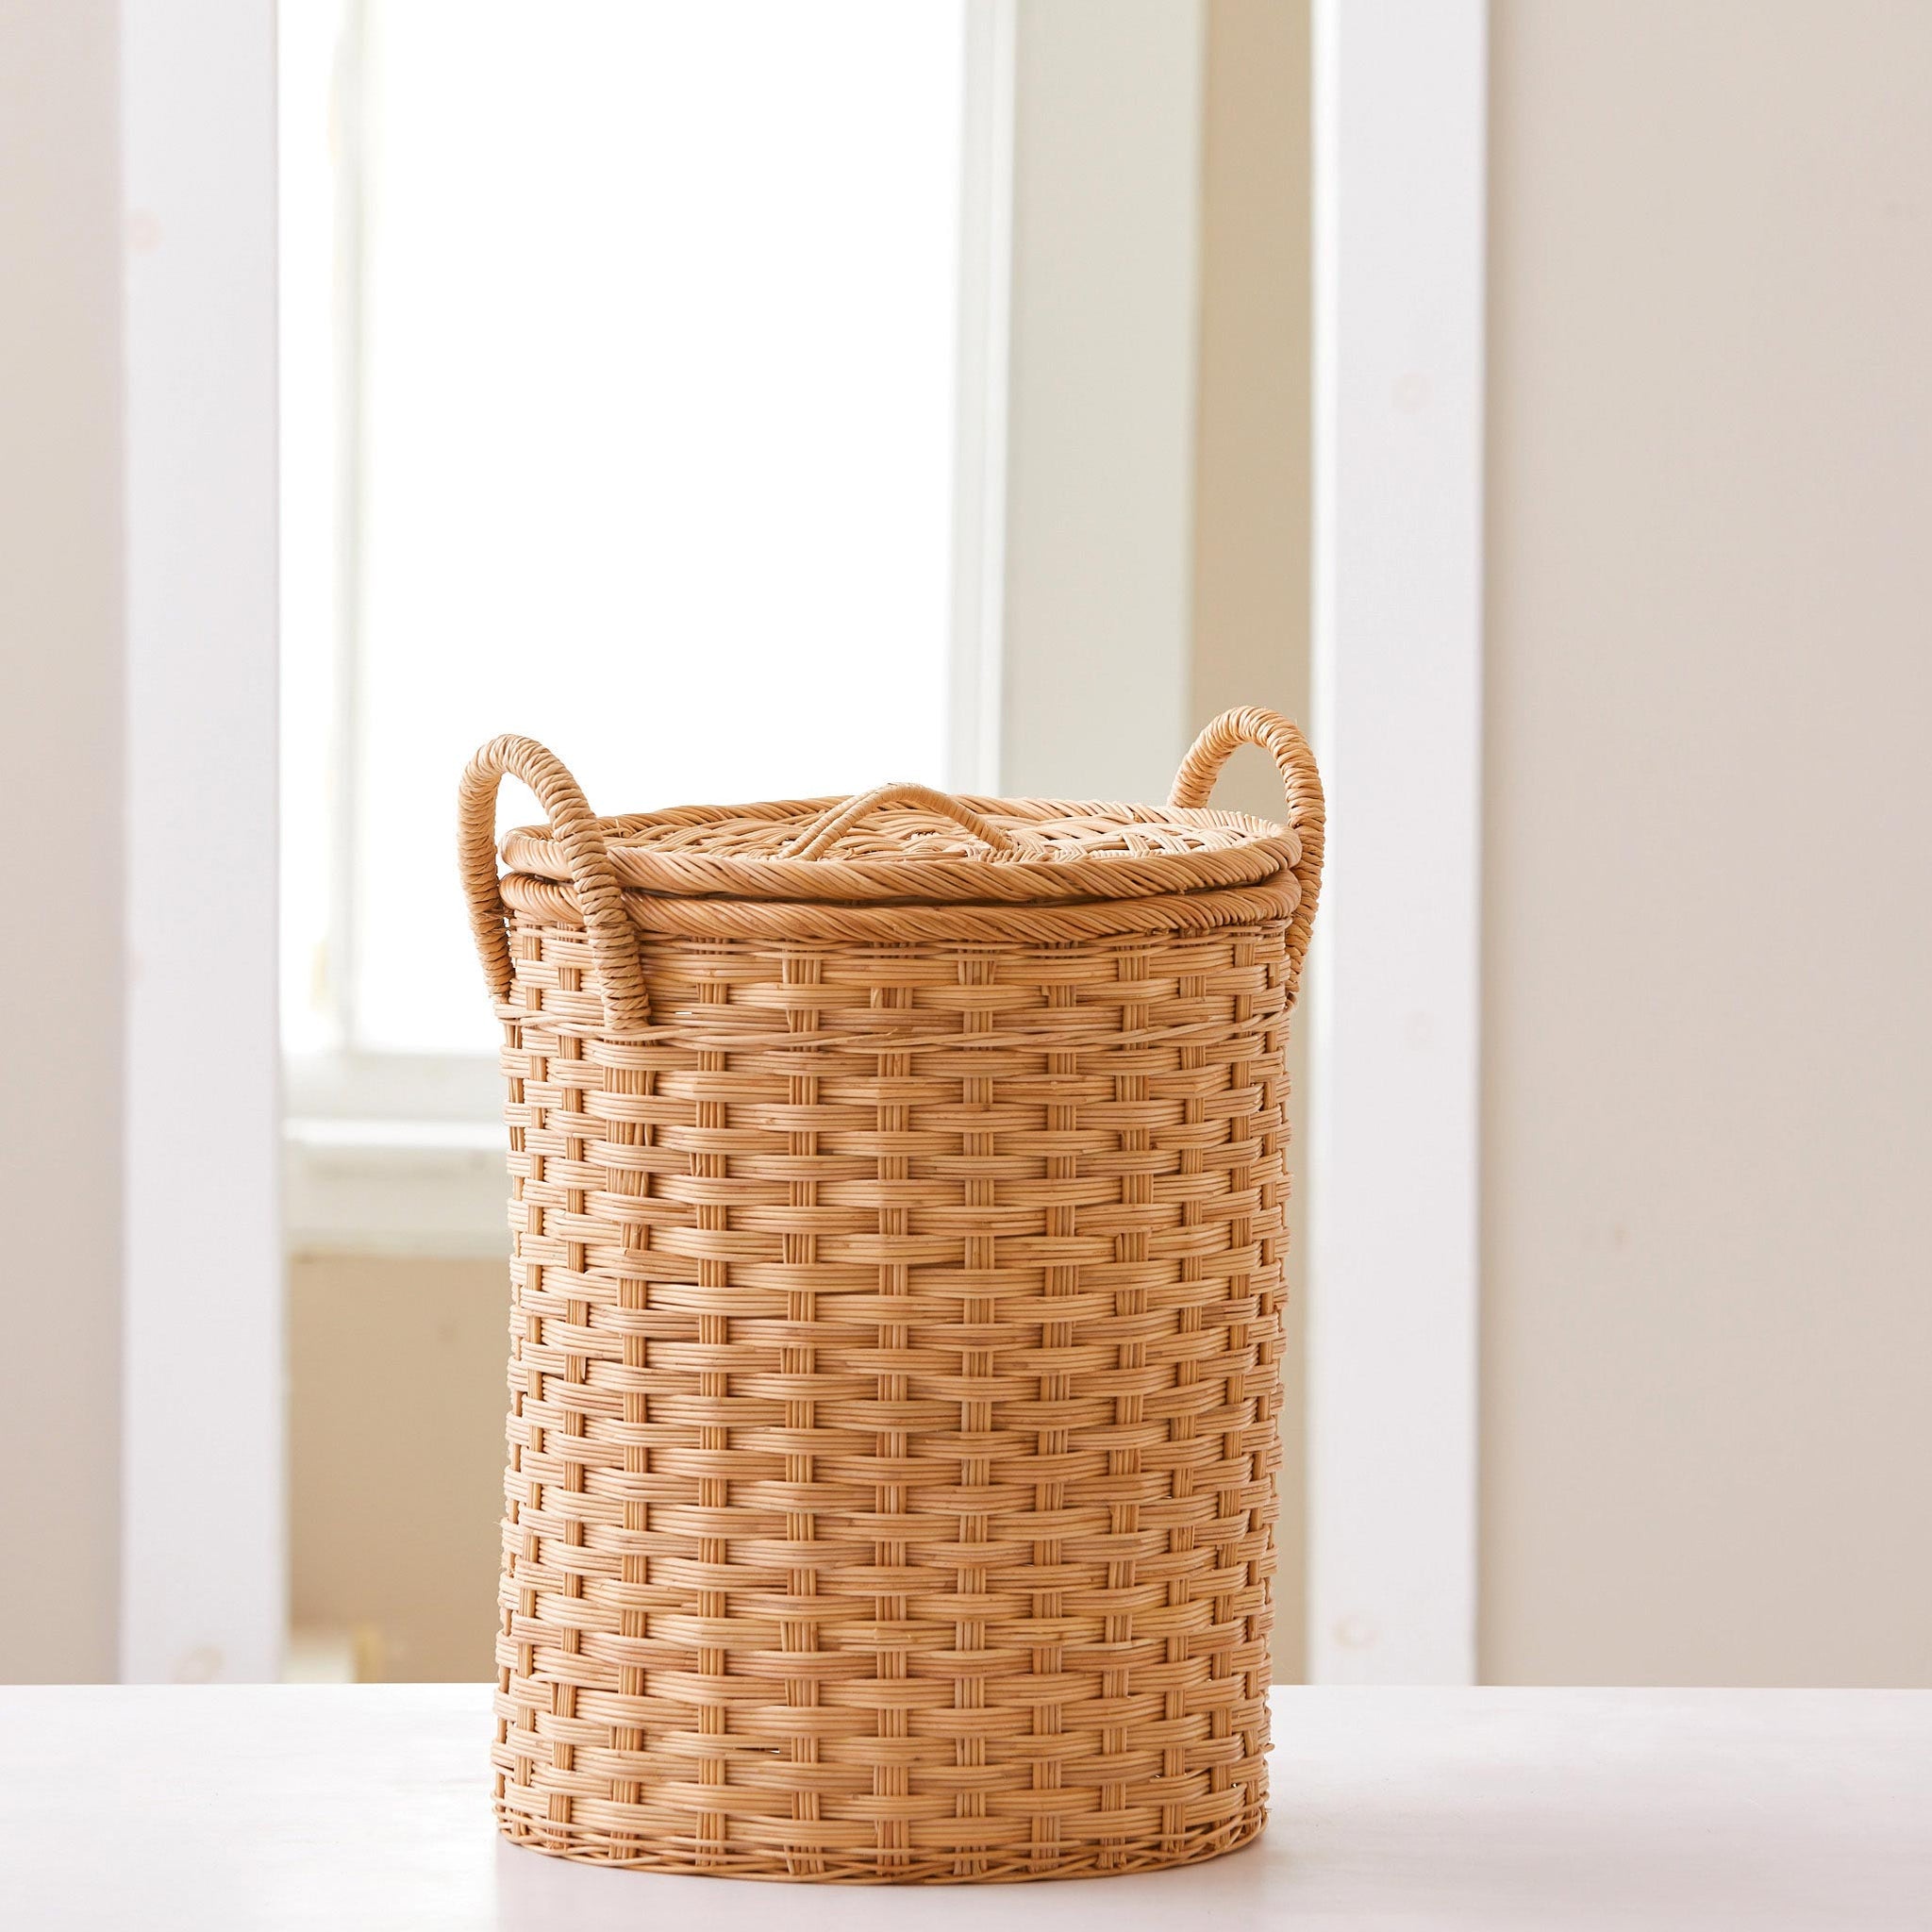 Vintiquewise Decorative Round Small Wicker Woven Rope Storage Blanket Basket with Braided Handles